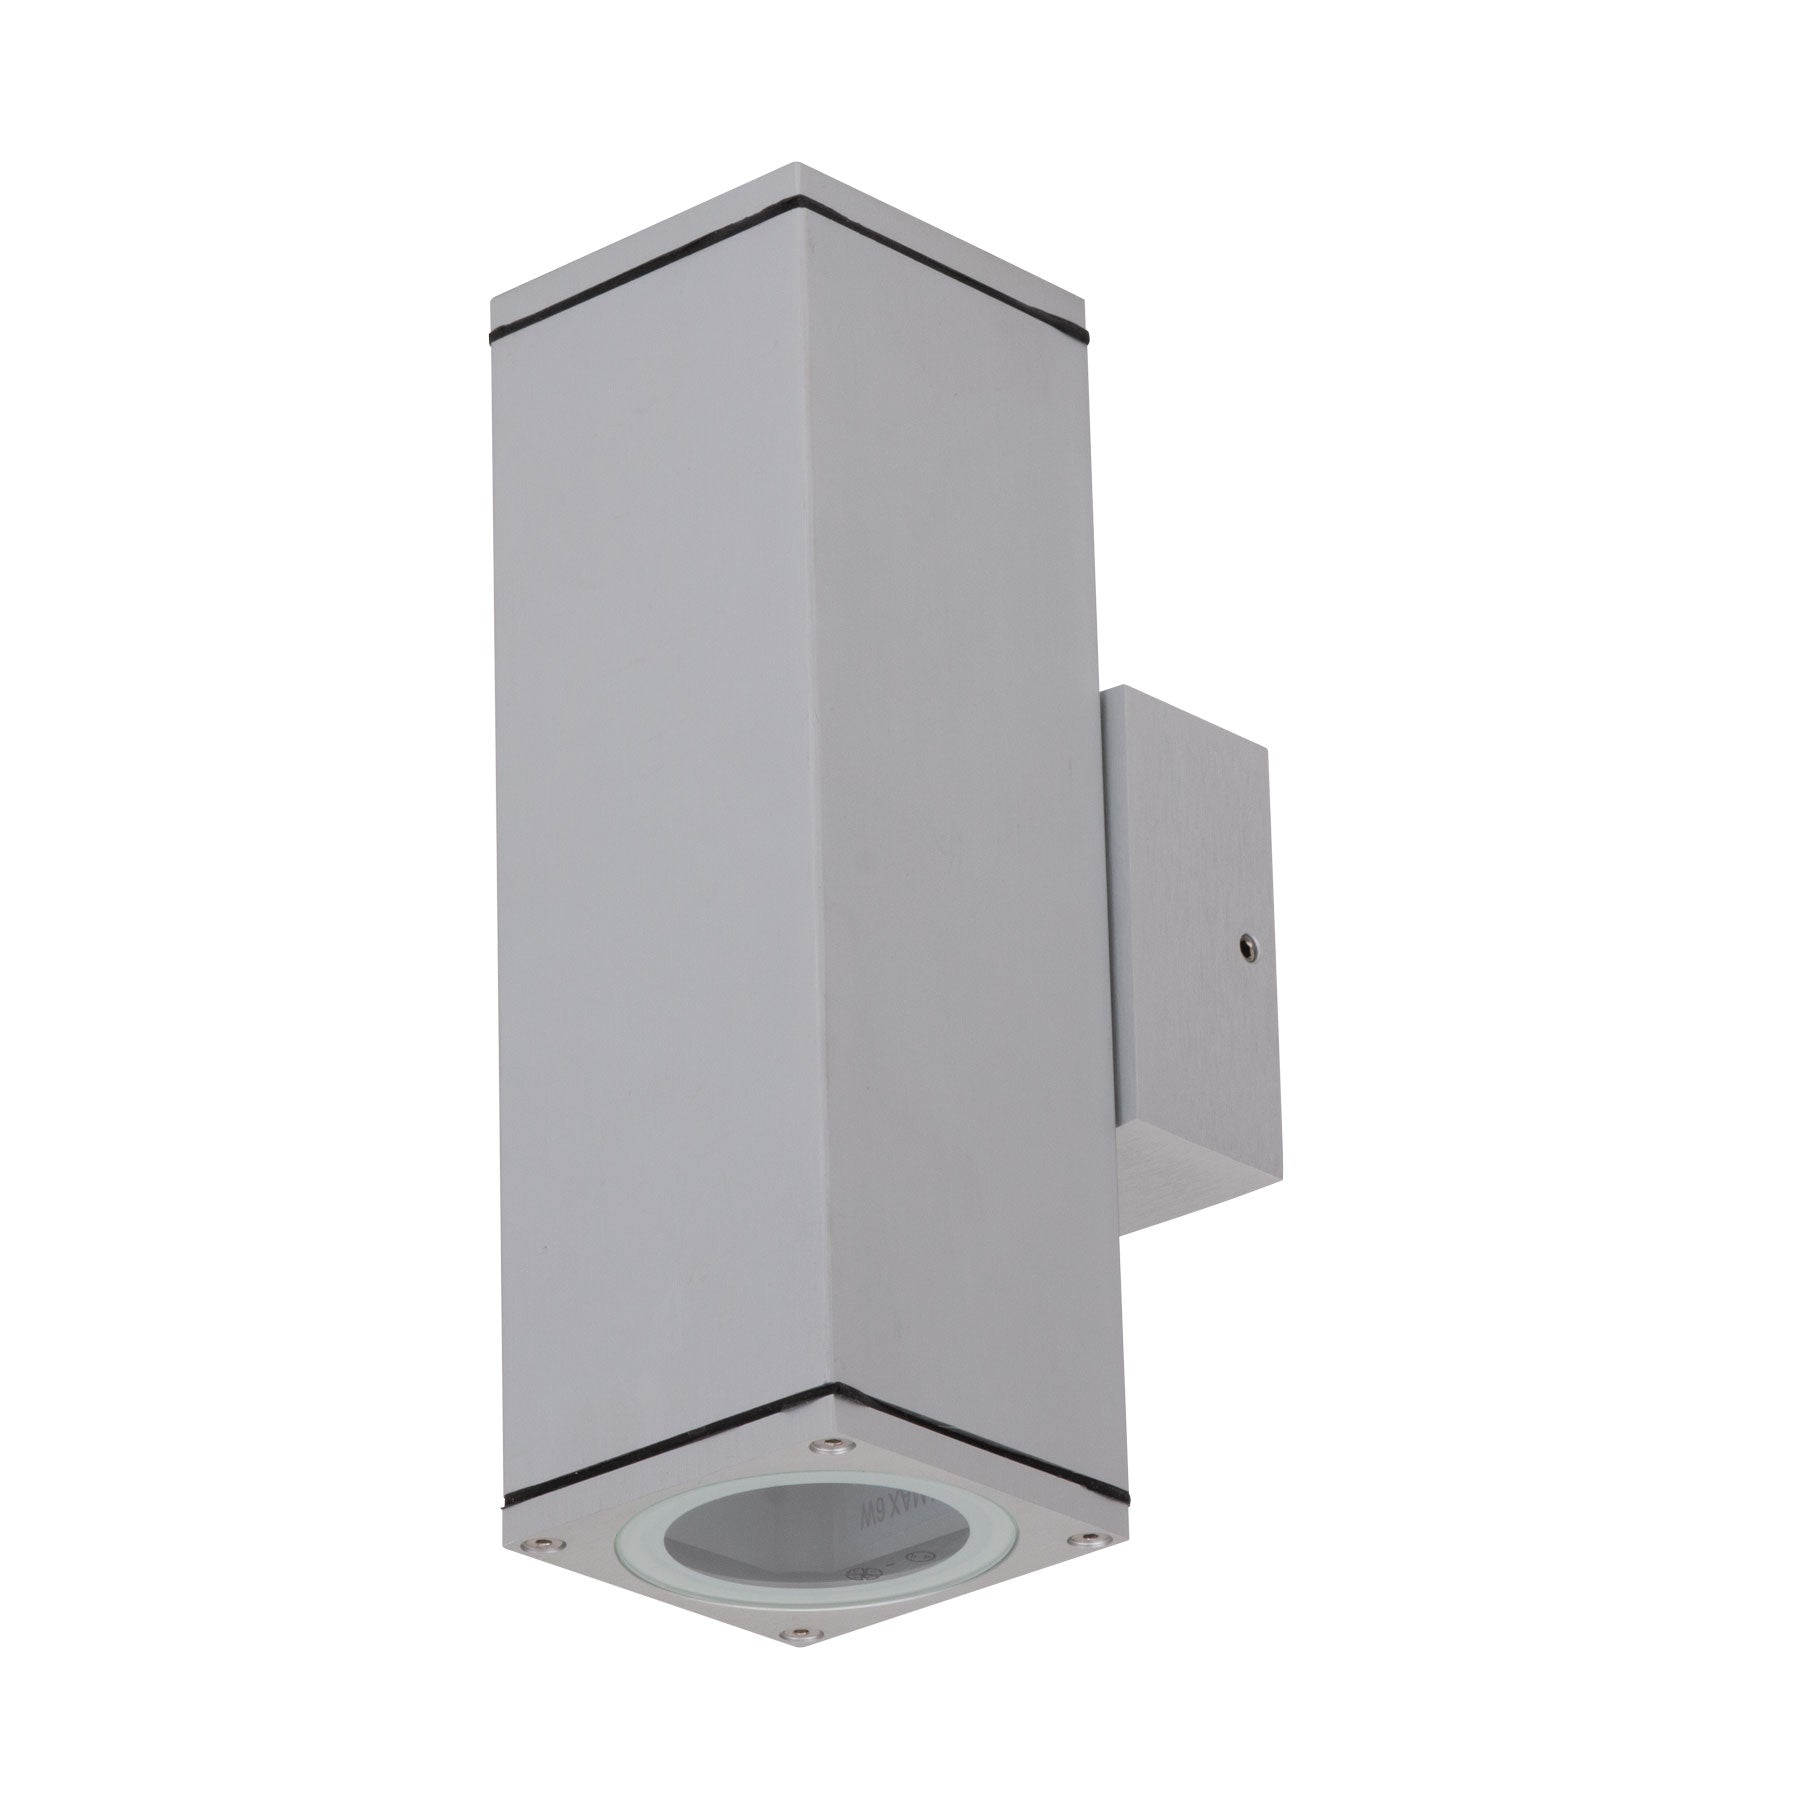 Domus Lighting Outdoor Wall Lights Aluminium / No Lamp DOMUS ALPHA-2 EXTERIOR WALL LIGHT WITH OR WITHOUT LAMP Lights-For-You 19397